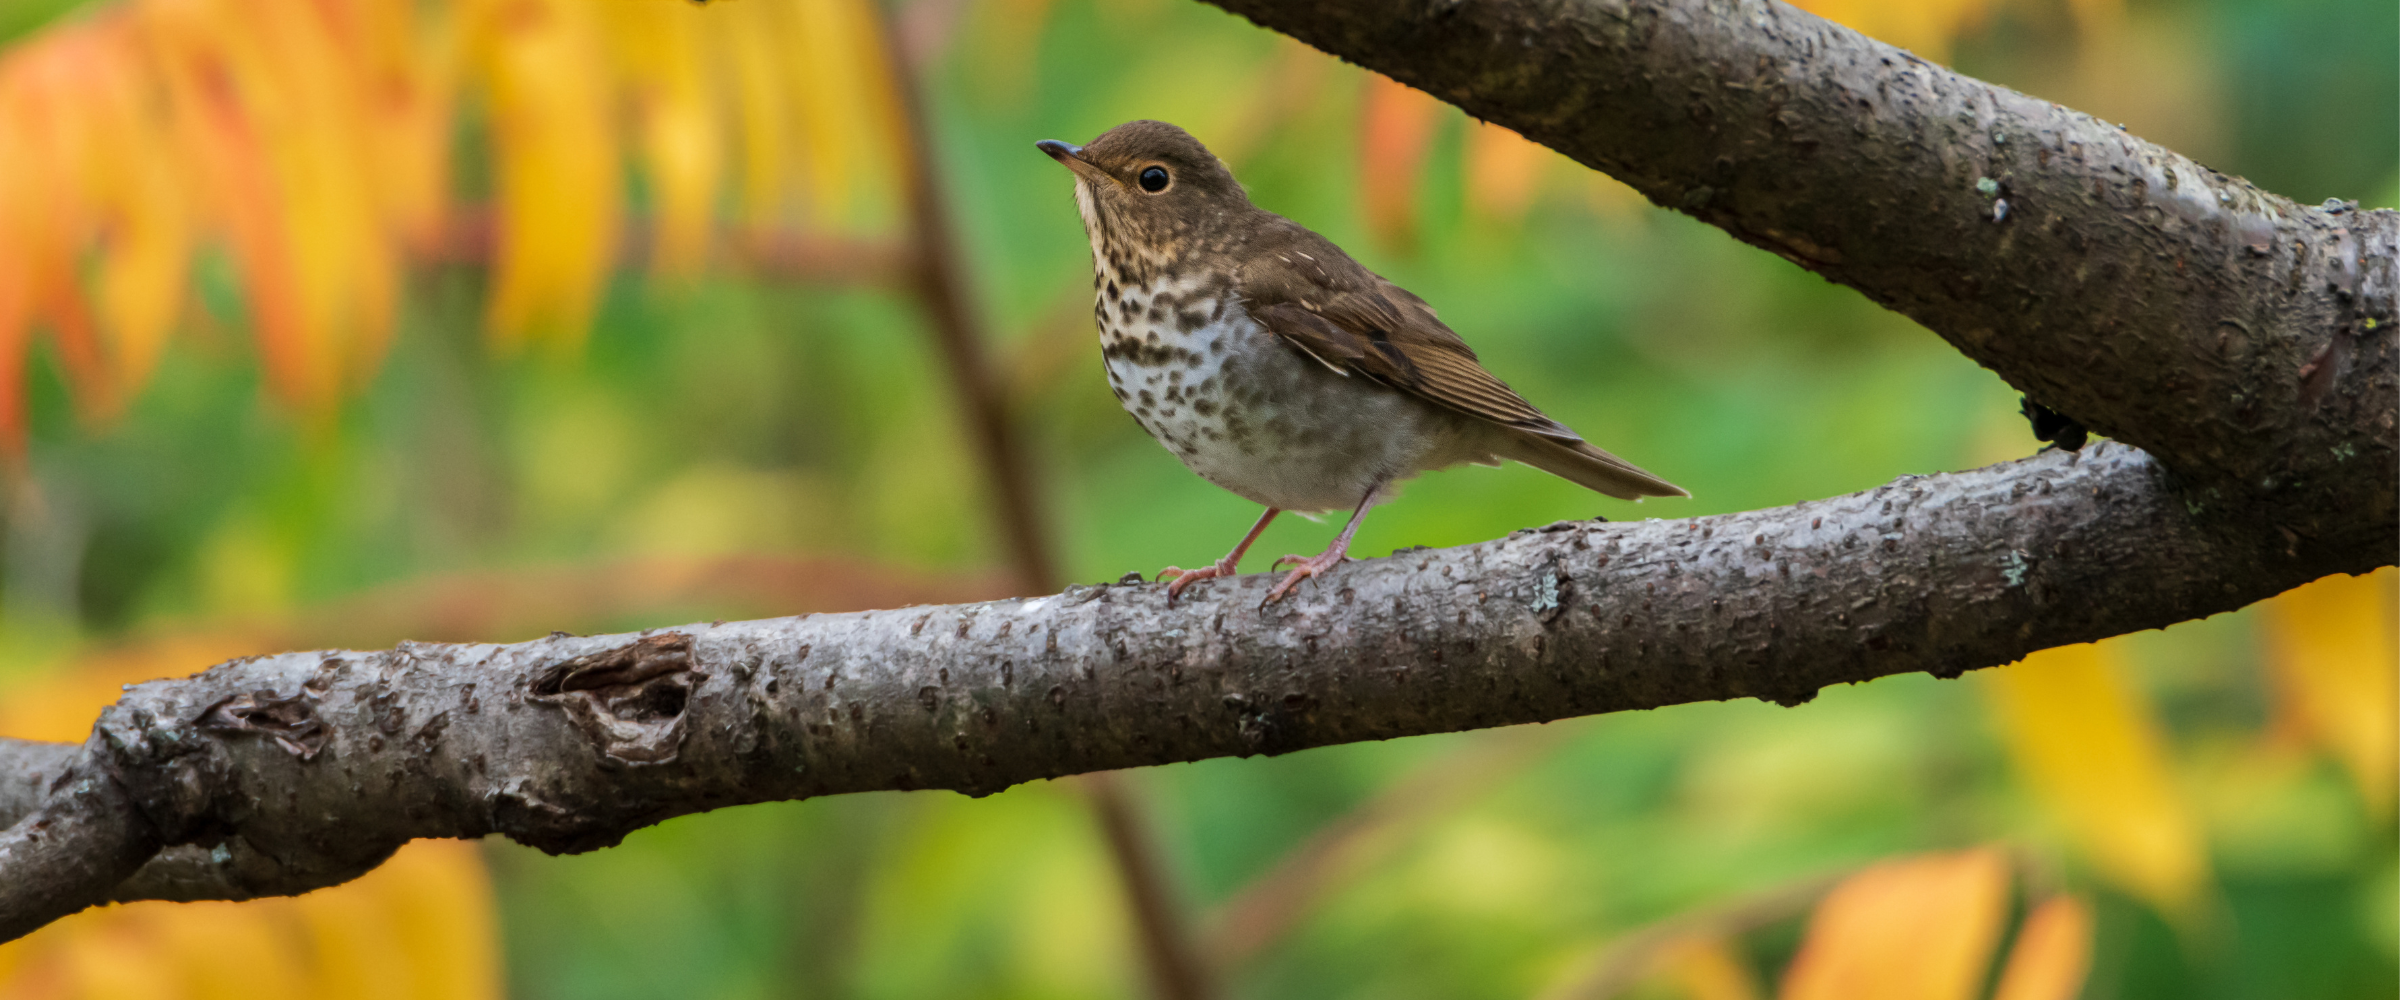 A Swainson's Thrush sits on a branch with fall foliage blurred in the background. It is a brown bird with a cream colored chest with brown spots. and white encircling its eye.